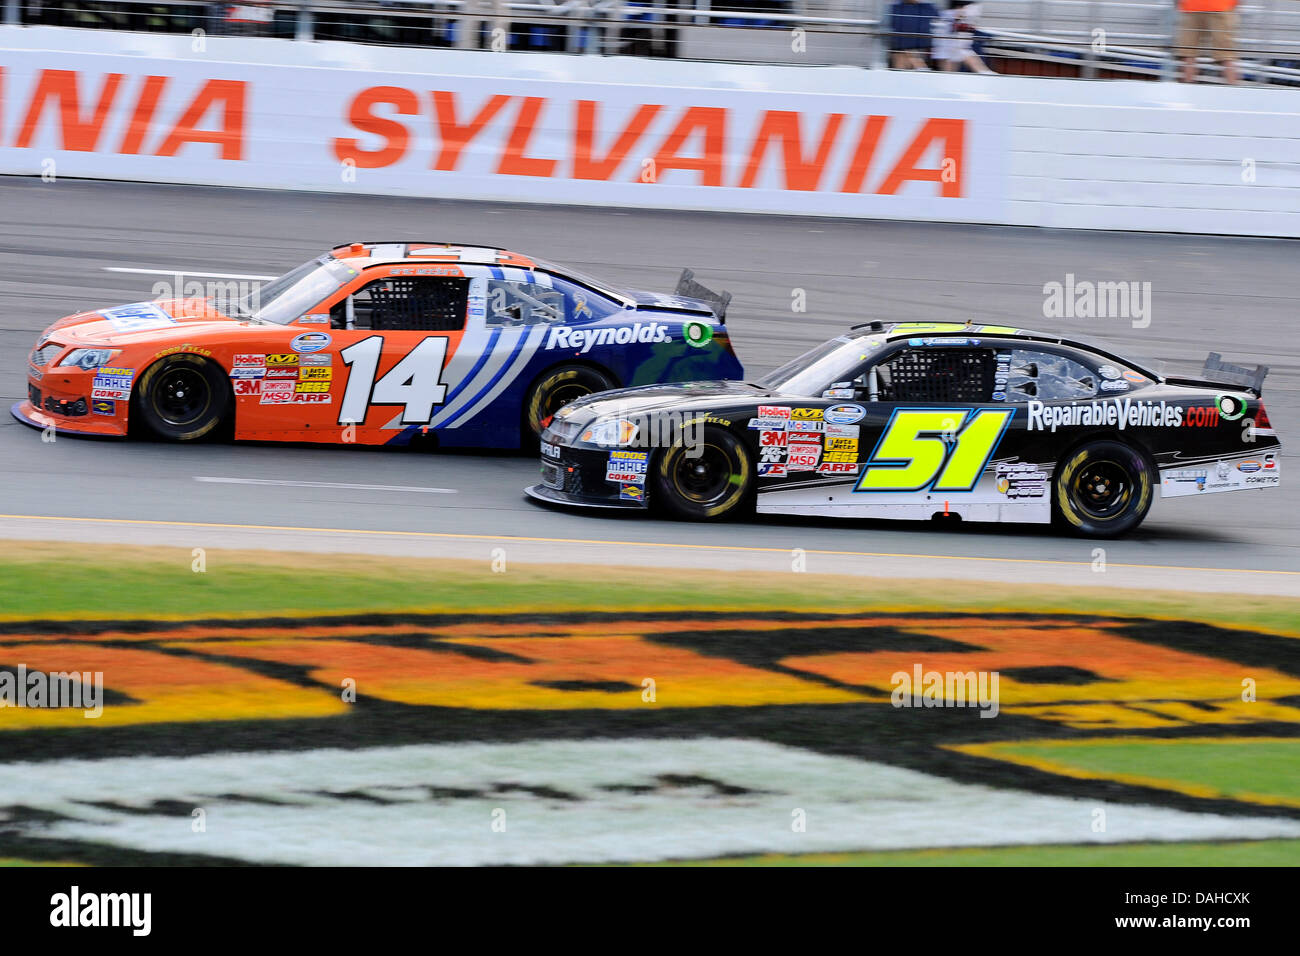 Loudon, NH, USA. 13th July, 2013. July 13, 2013 - Loudon, New Hampshire U.S. - Nationwide Series driver Eric McClure (14) and driver Jeremy Clements (51) battle into turn #2 while racing in the NASCAR Nationwide Series CNBC Prime's ''The Profit'' 200 race being held at the New Hampshire Motor Speedway in Loudon, New Hampshire. Eric Canha/CSM/Alamy Live News Stock Photo